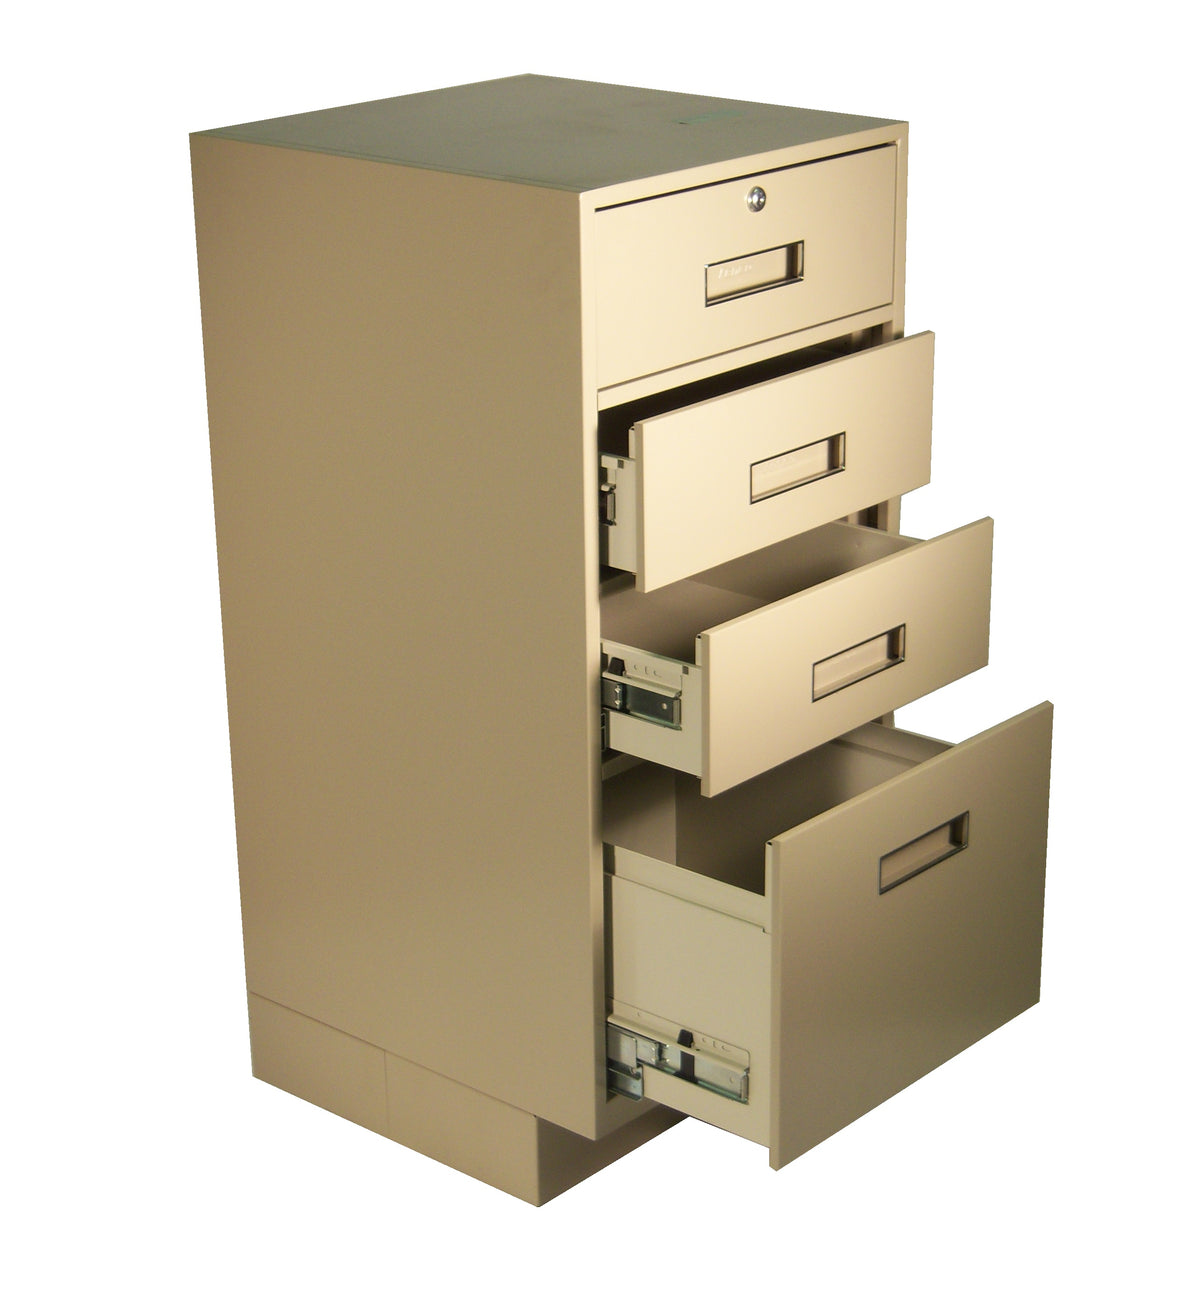 Fenco F-212 Pedestal Unit with 3 Box Drawers and 1 Legal Drawer Open